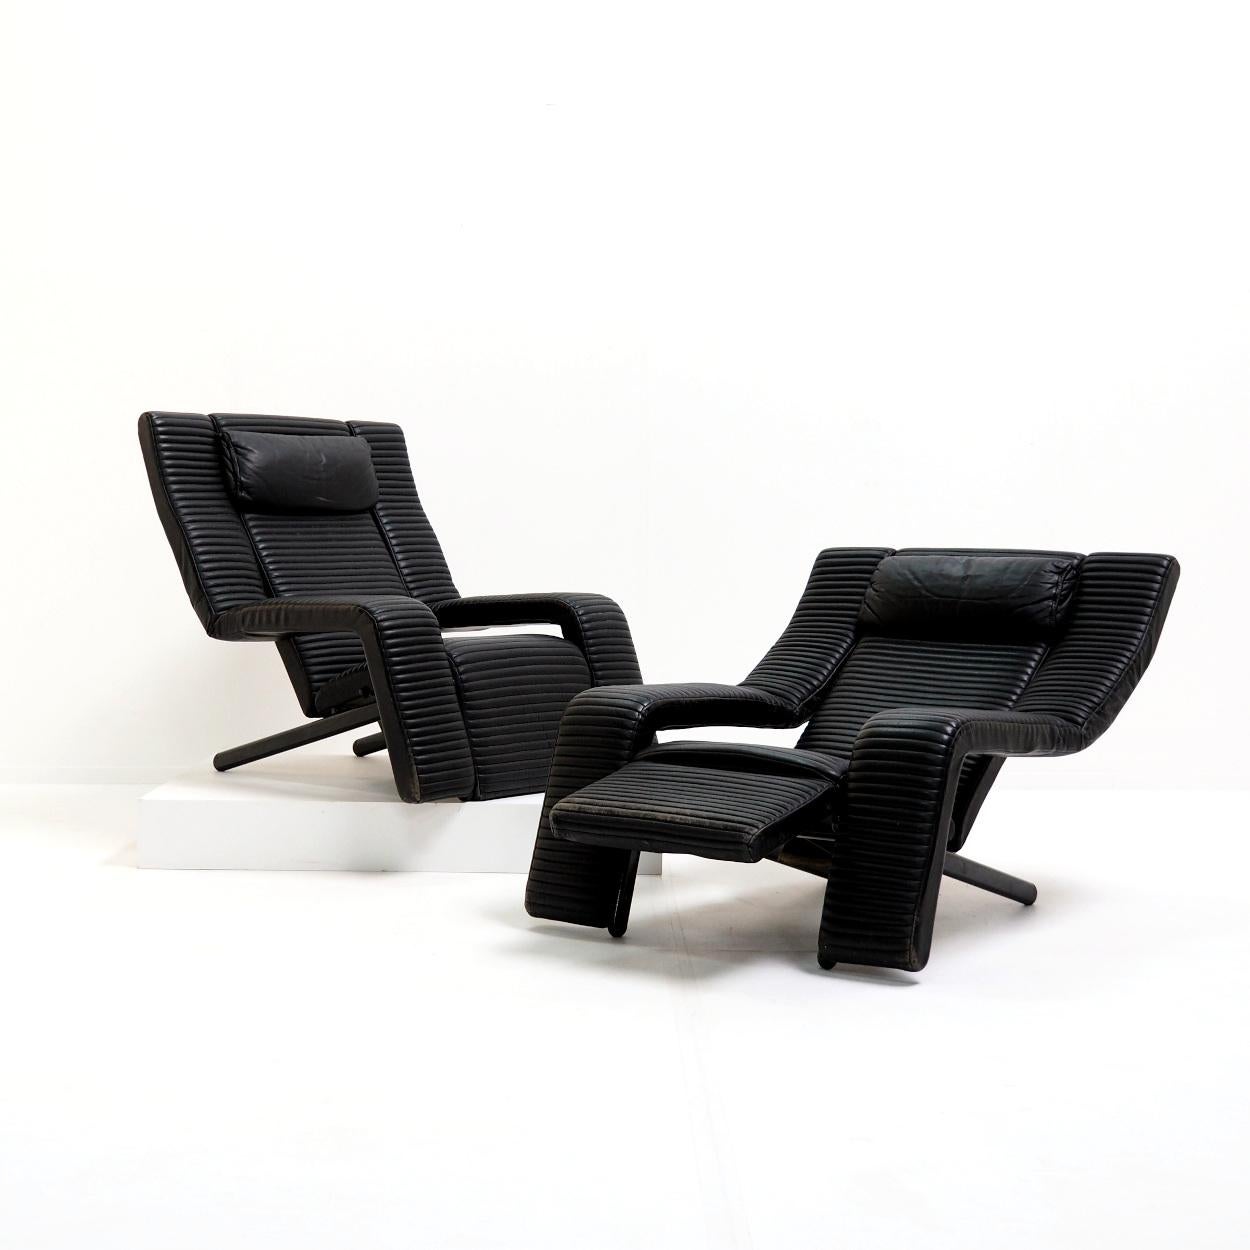 Set of postmodern adjustable lounge chairs designed in 1985 by Tittina Ammannati & Giampiero Vitteli. The seats are upholstered in stitched black leather with a sturdy metal structure that allows the seats to recline and have a footrest. The seats